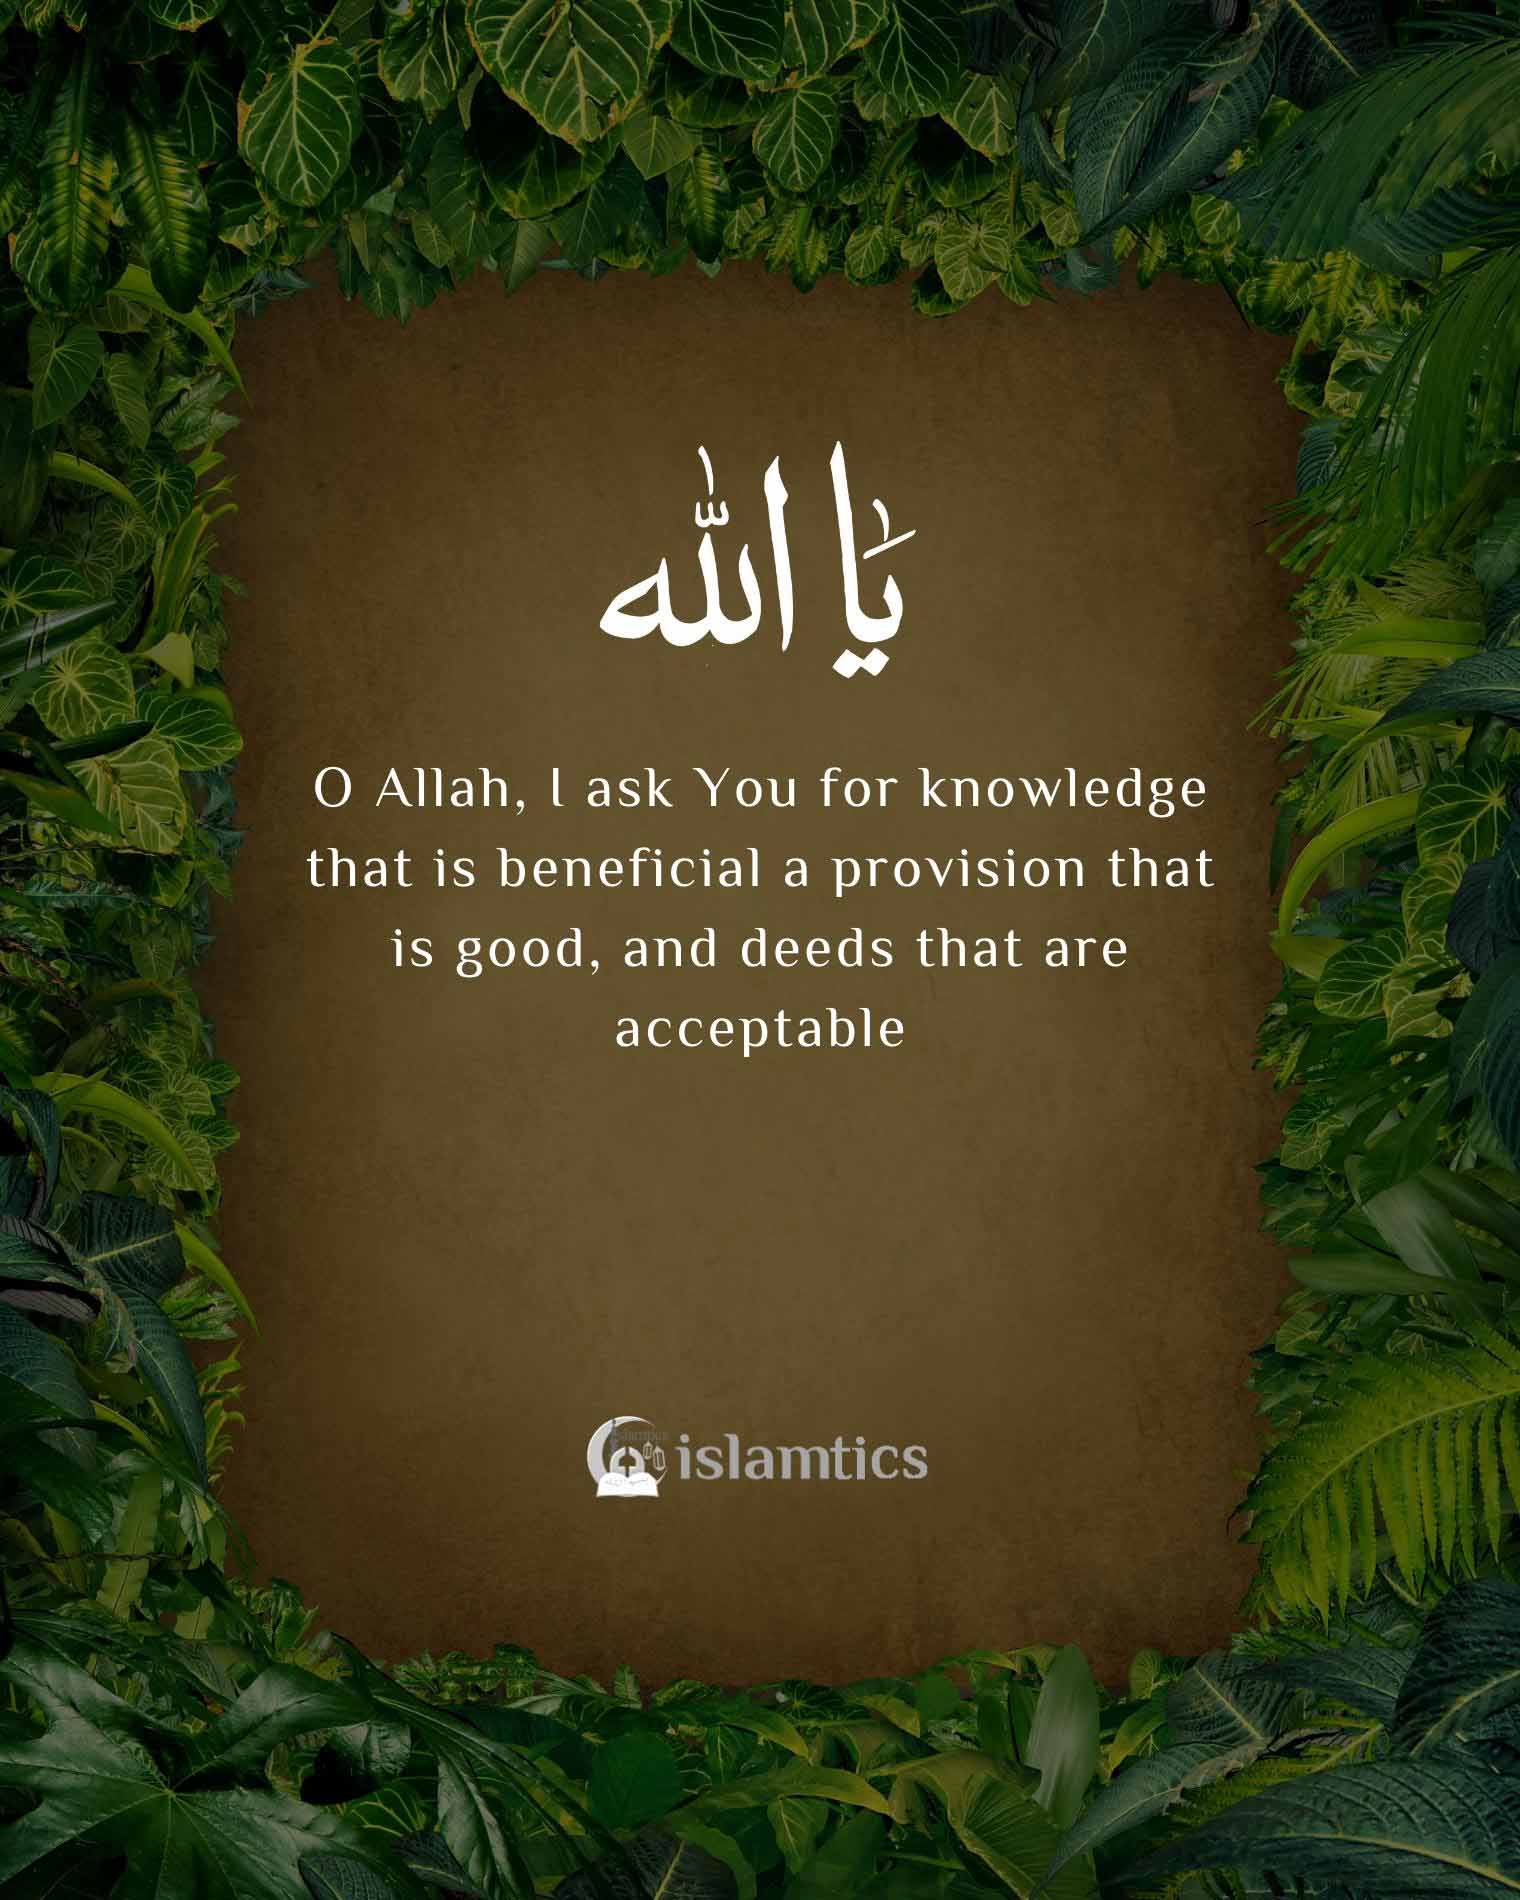  O Allah, I ask You for knowledge that is beneficial